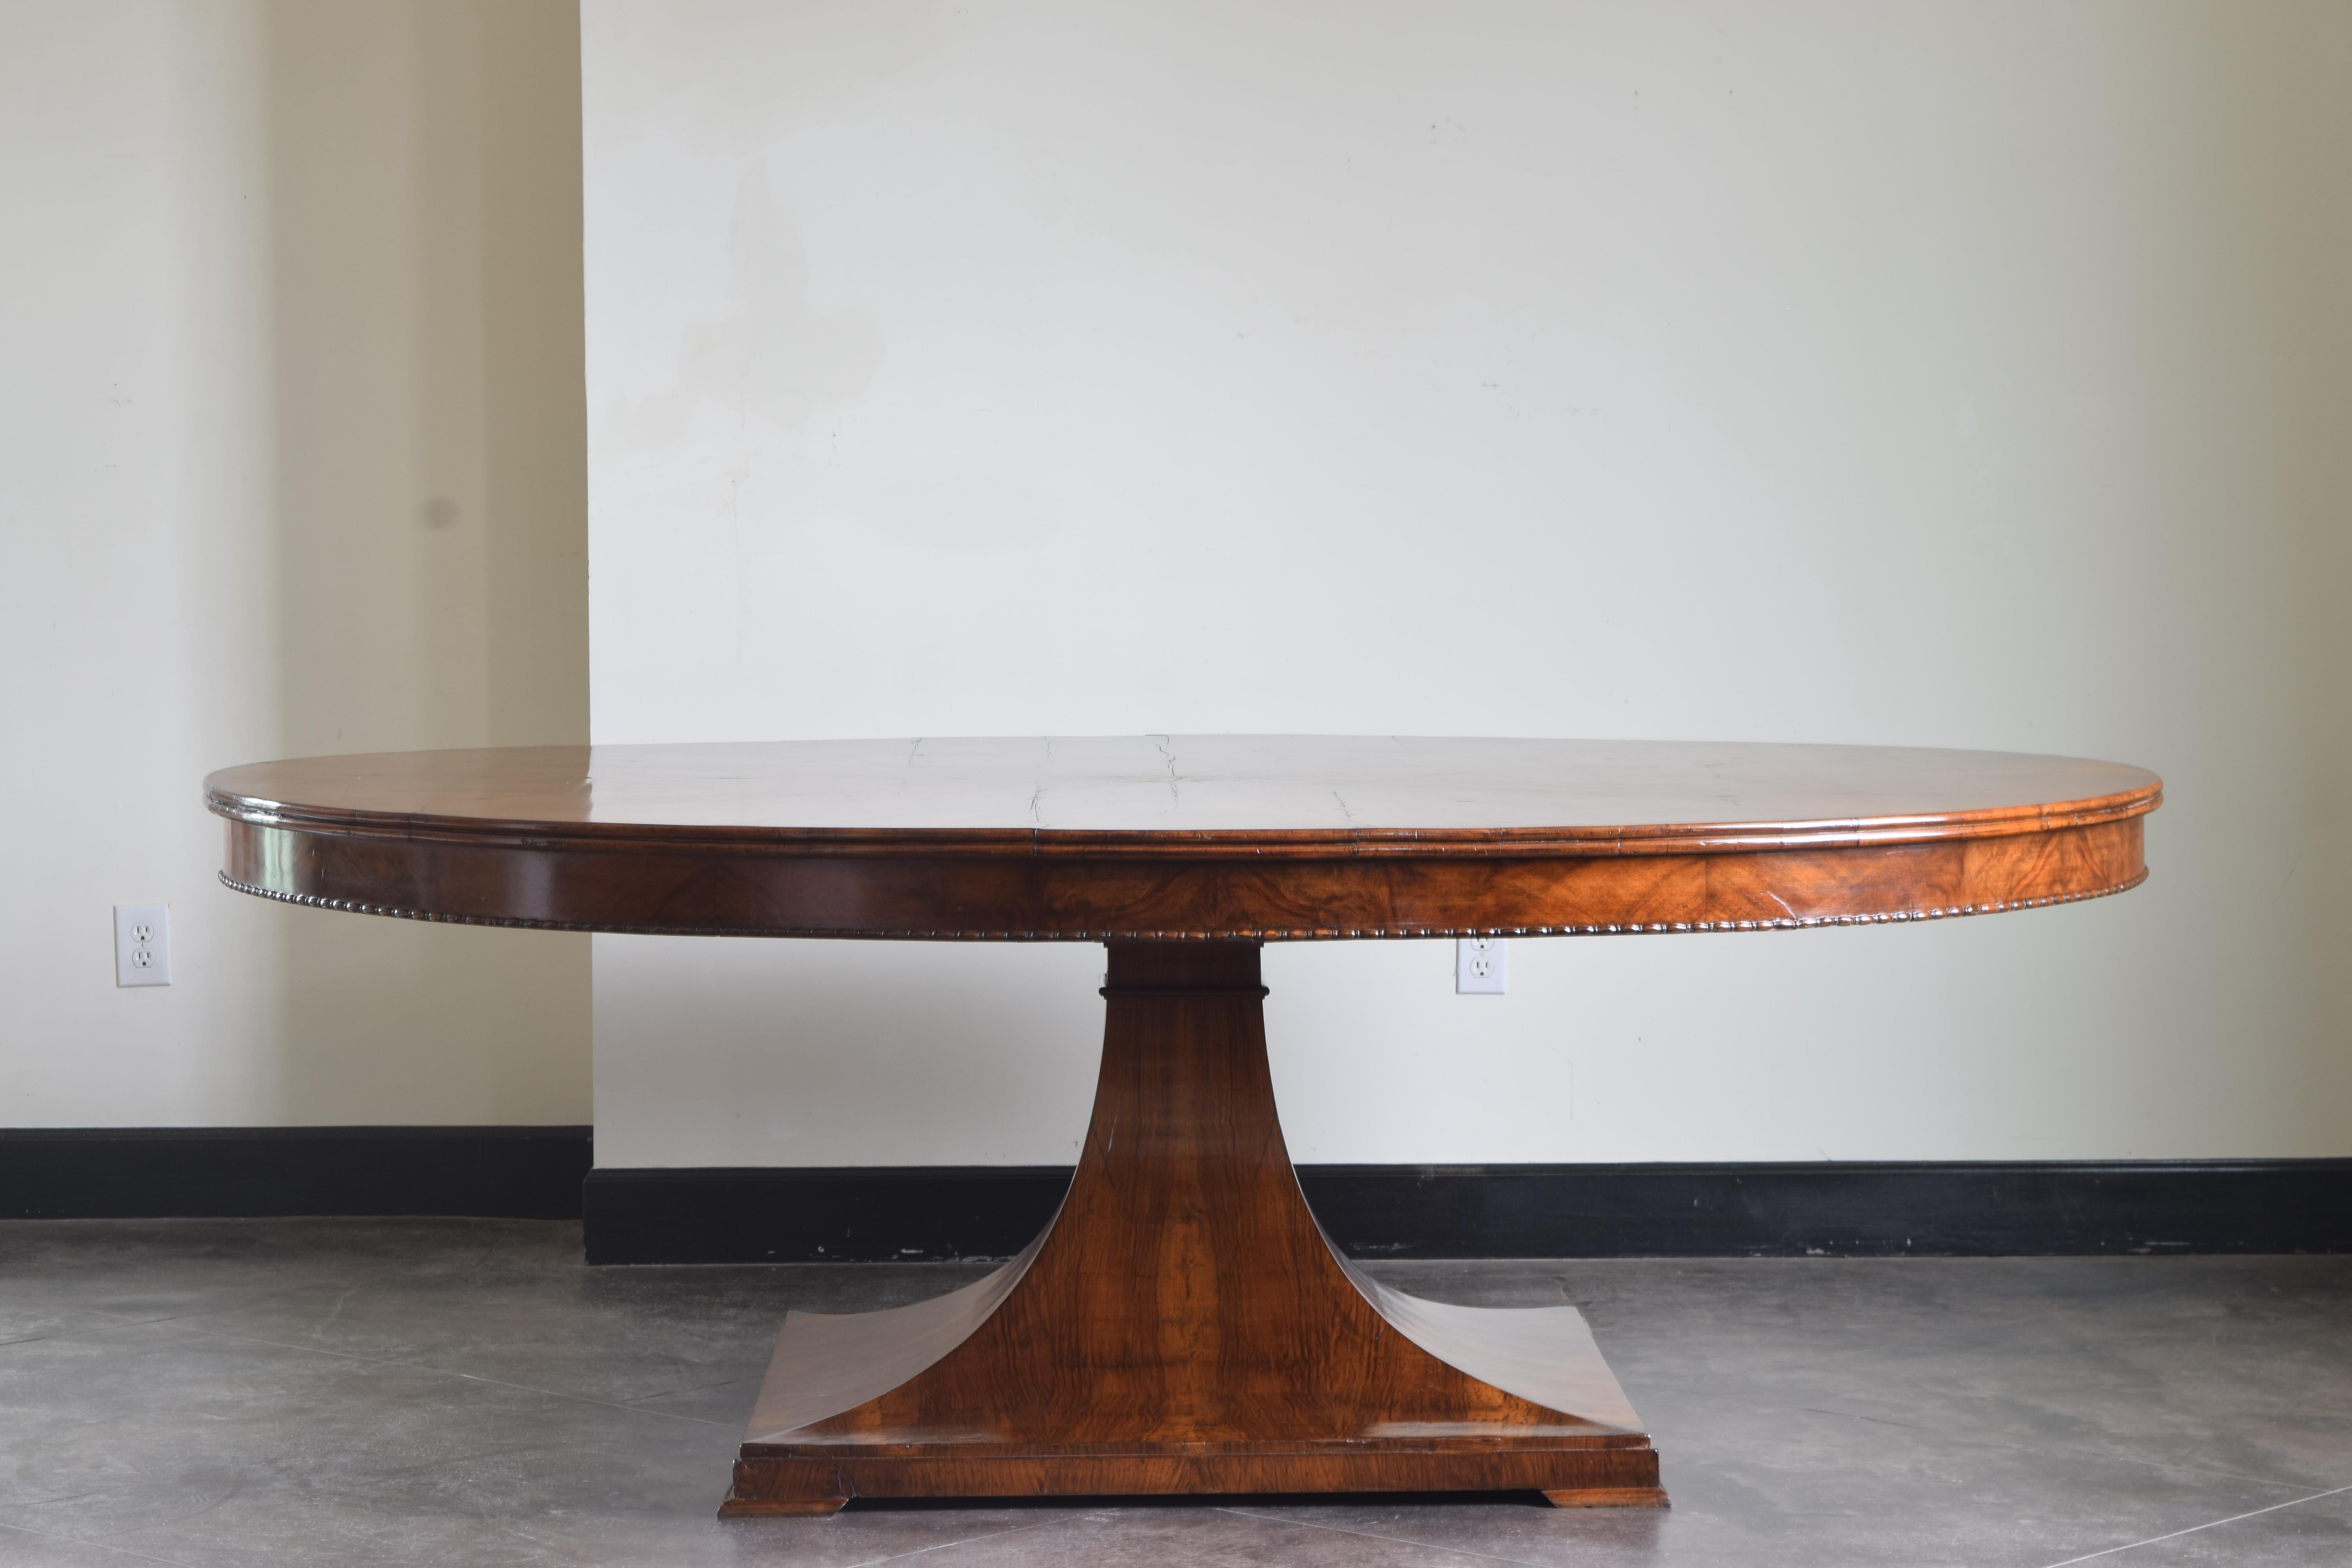 This large and rare center or dining table is veneered in beautifully grained Northern Italian walnut with an startburst center medallion, the molded edge at the top of an apron with a lower egg and dart molded edge, the top rests on a 4 sided